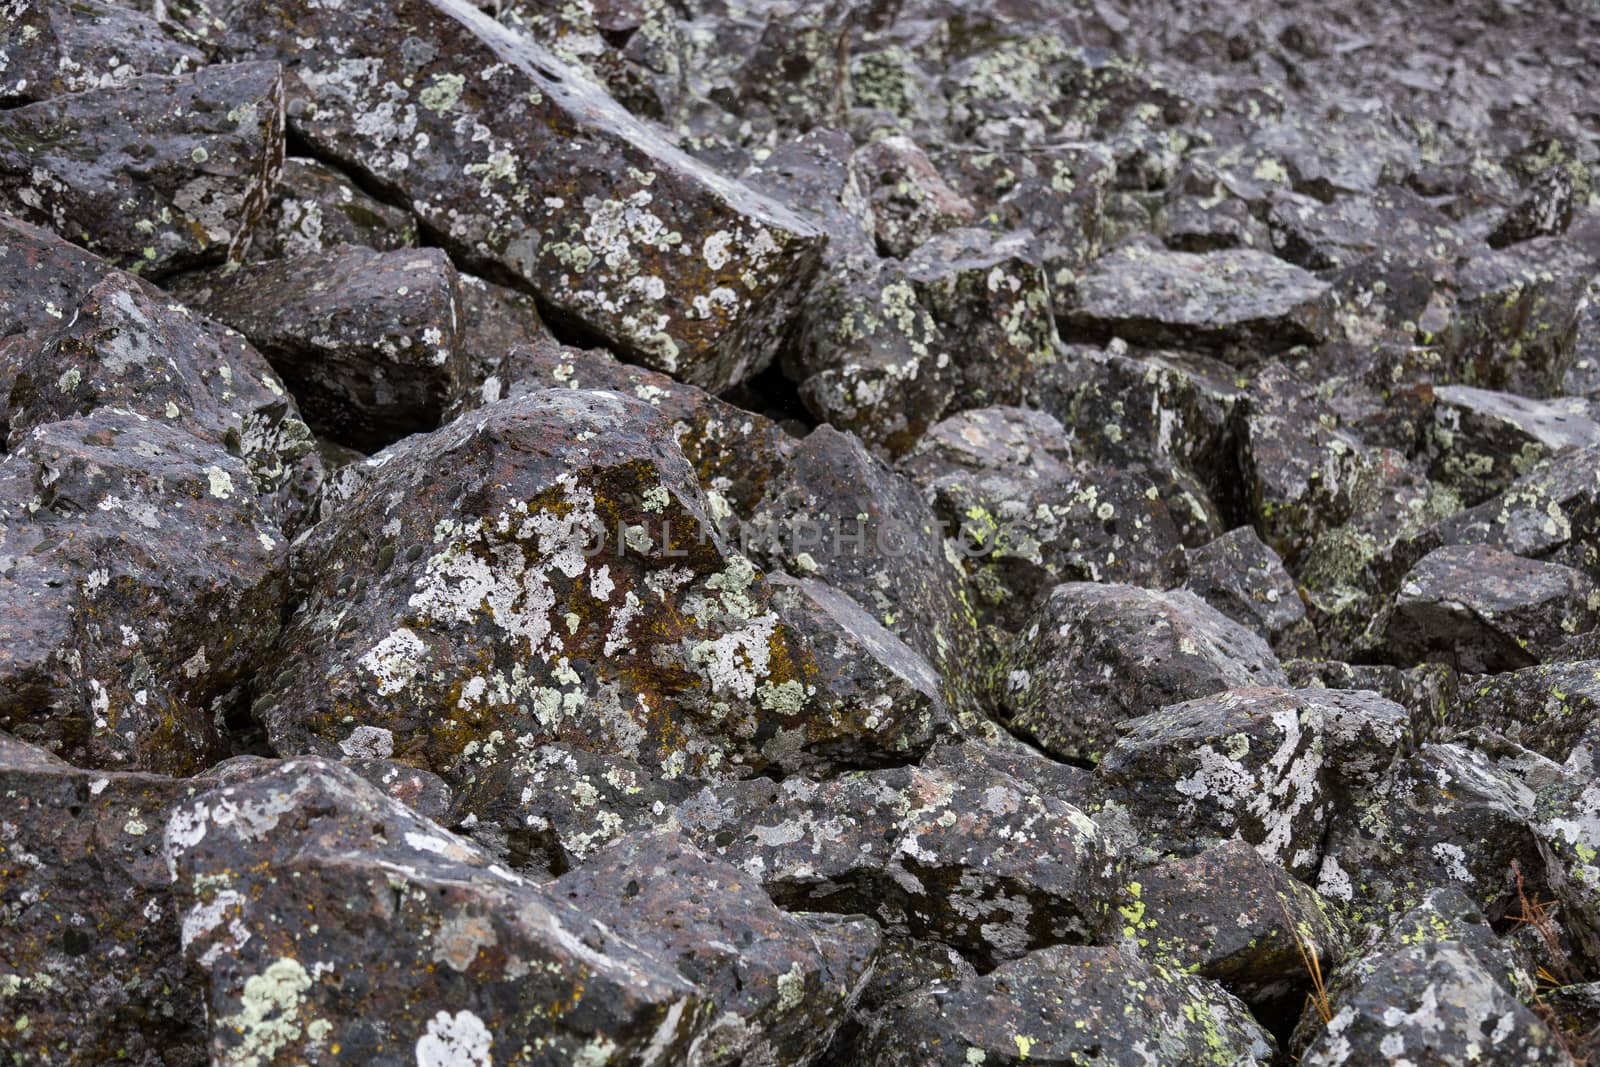 Stone pile at the bottom of Sheepeater Cliff in Yellowstone National Park.